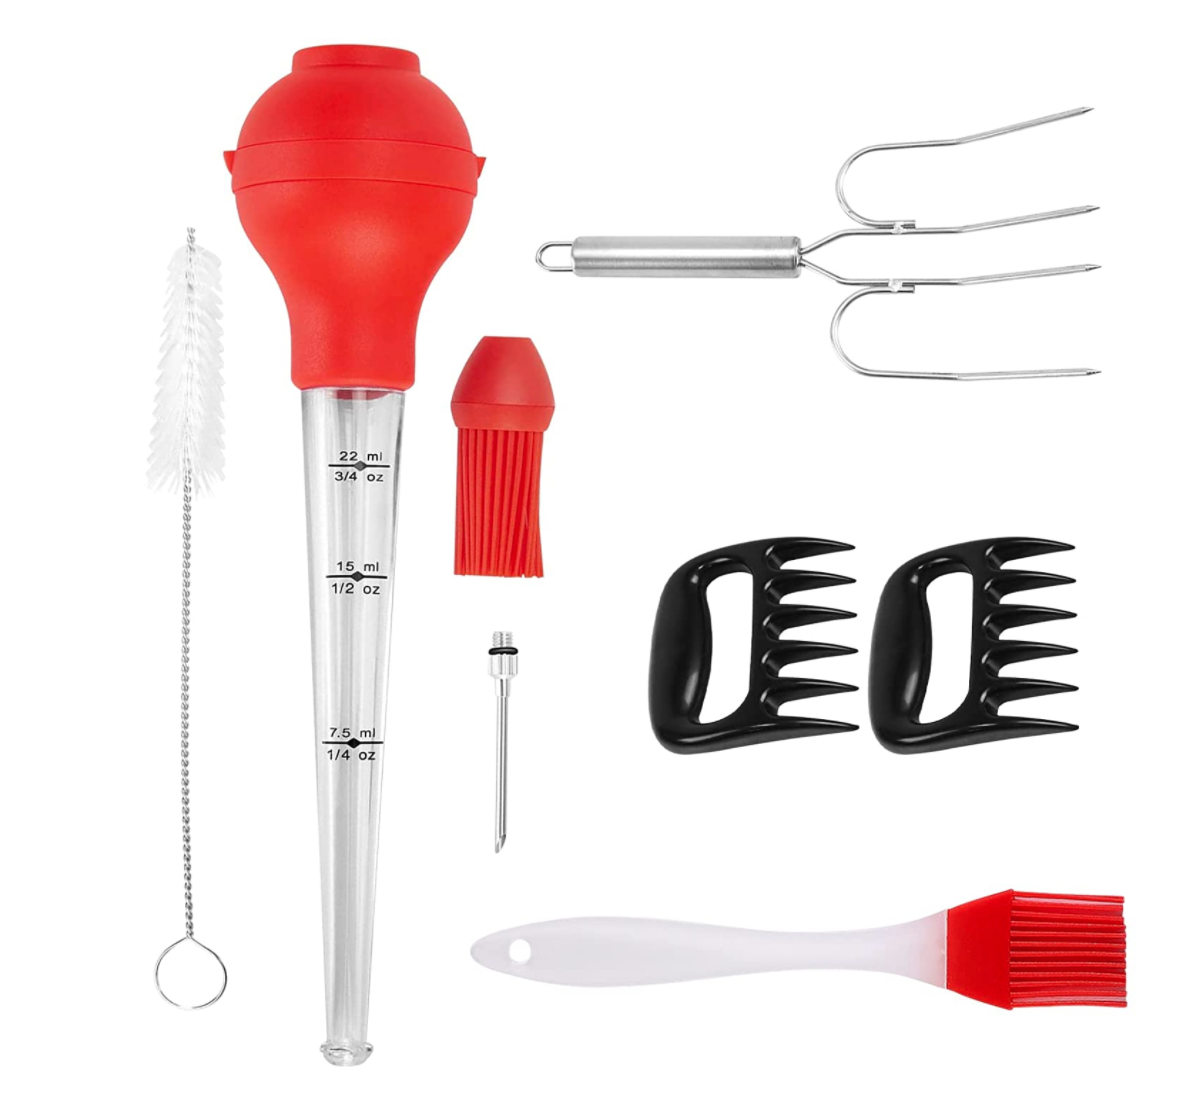 Nylon Heat-resistant Turkey Baster Cooking Set Includes Meat Baster, 1  Silicone Basting Brush and 2 Cleaning Brush for BBQ Grill Baking Kitchen